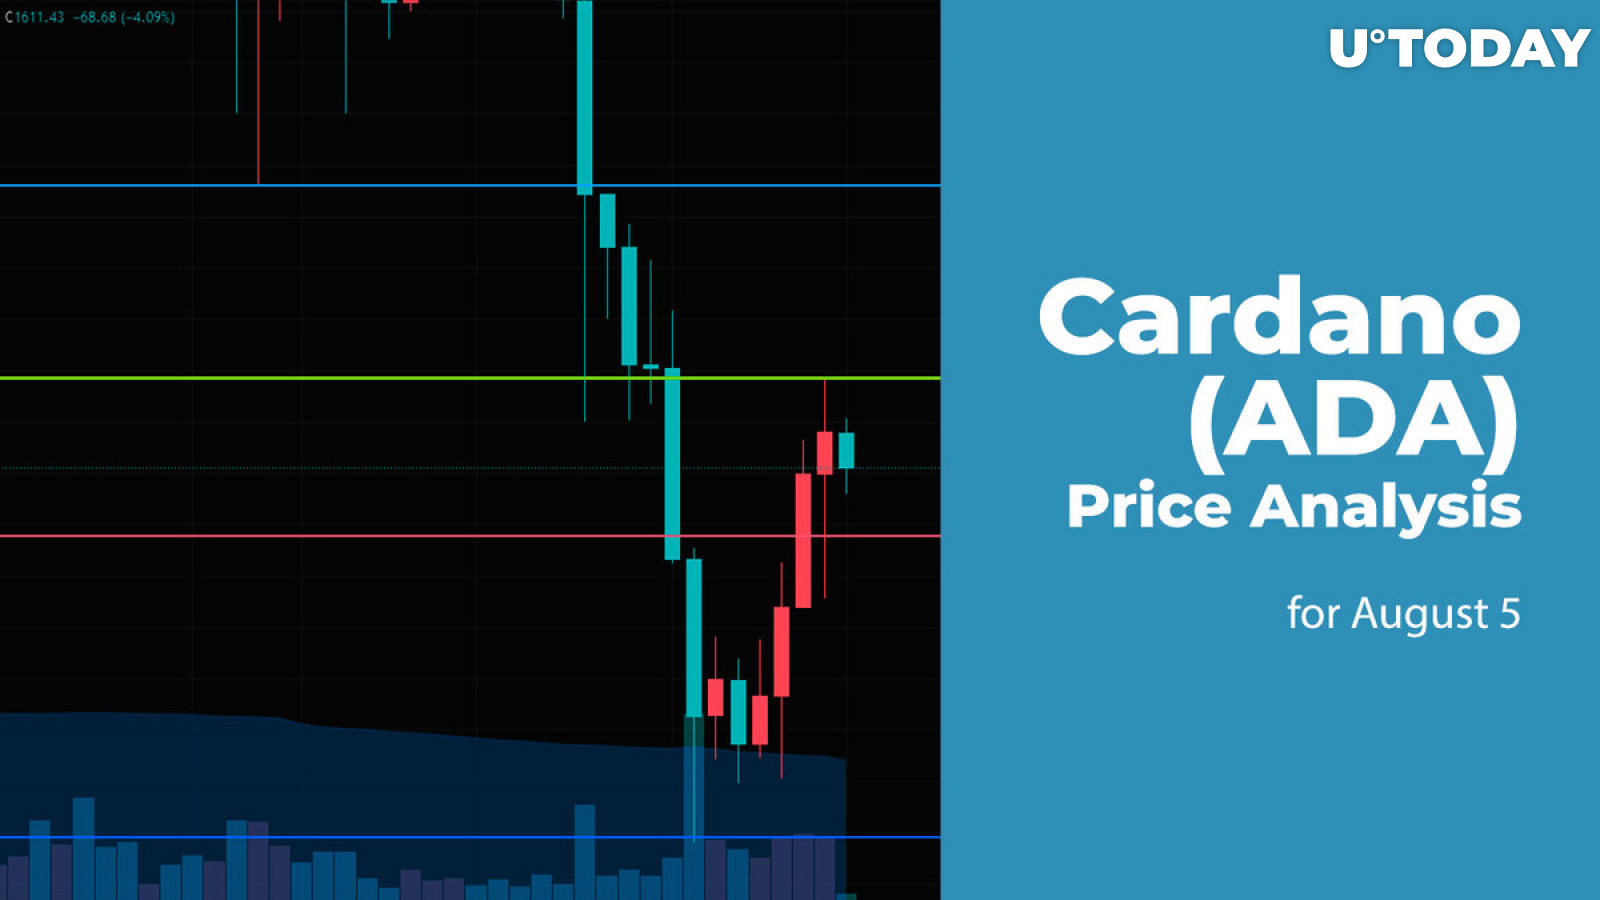 Cardano (ADA) Price Analysis for August 5